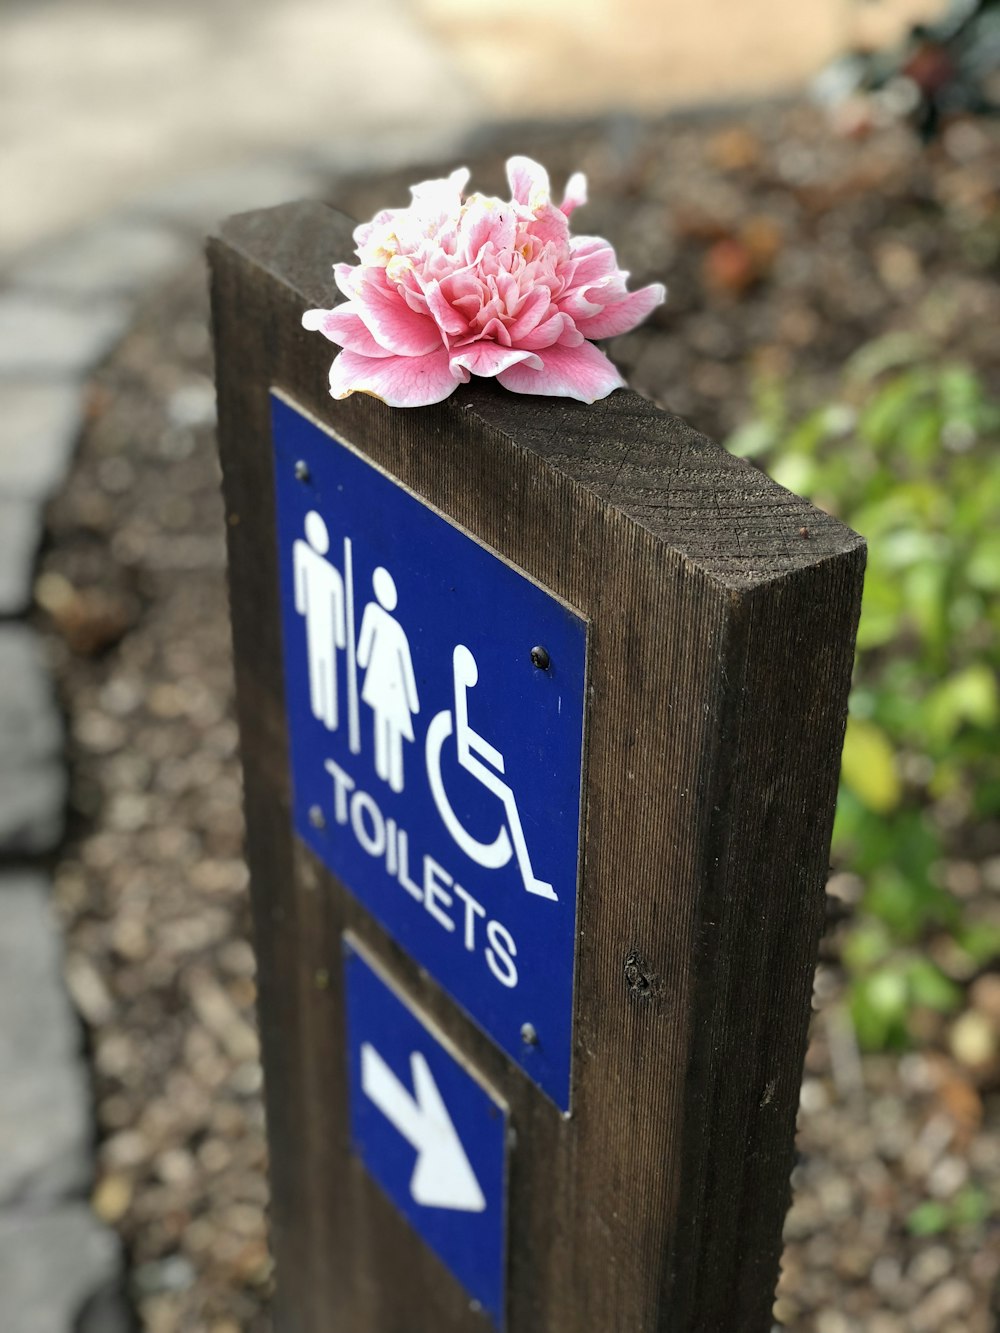 a flower on a sign